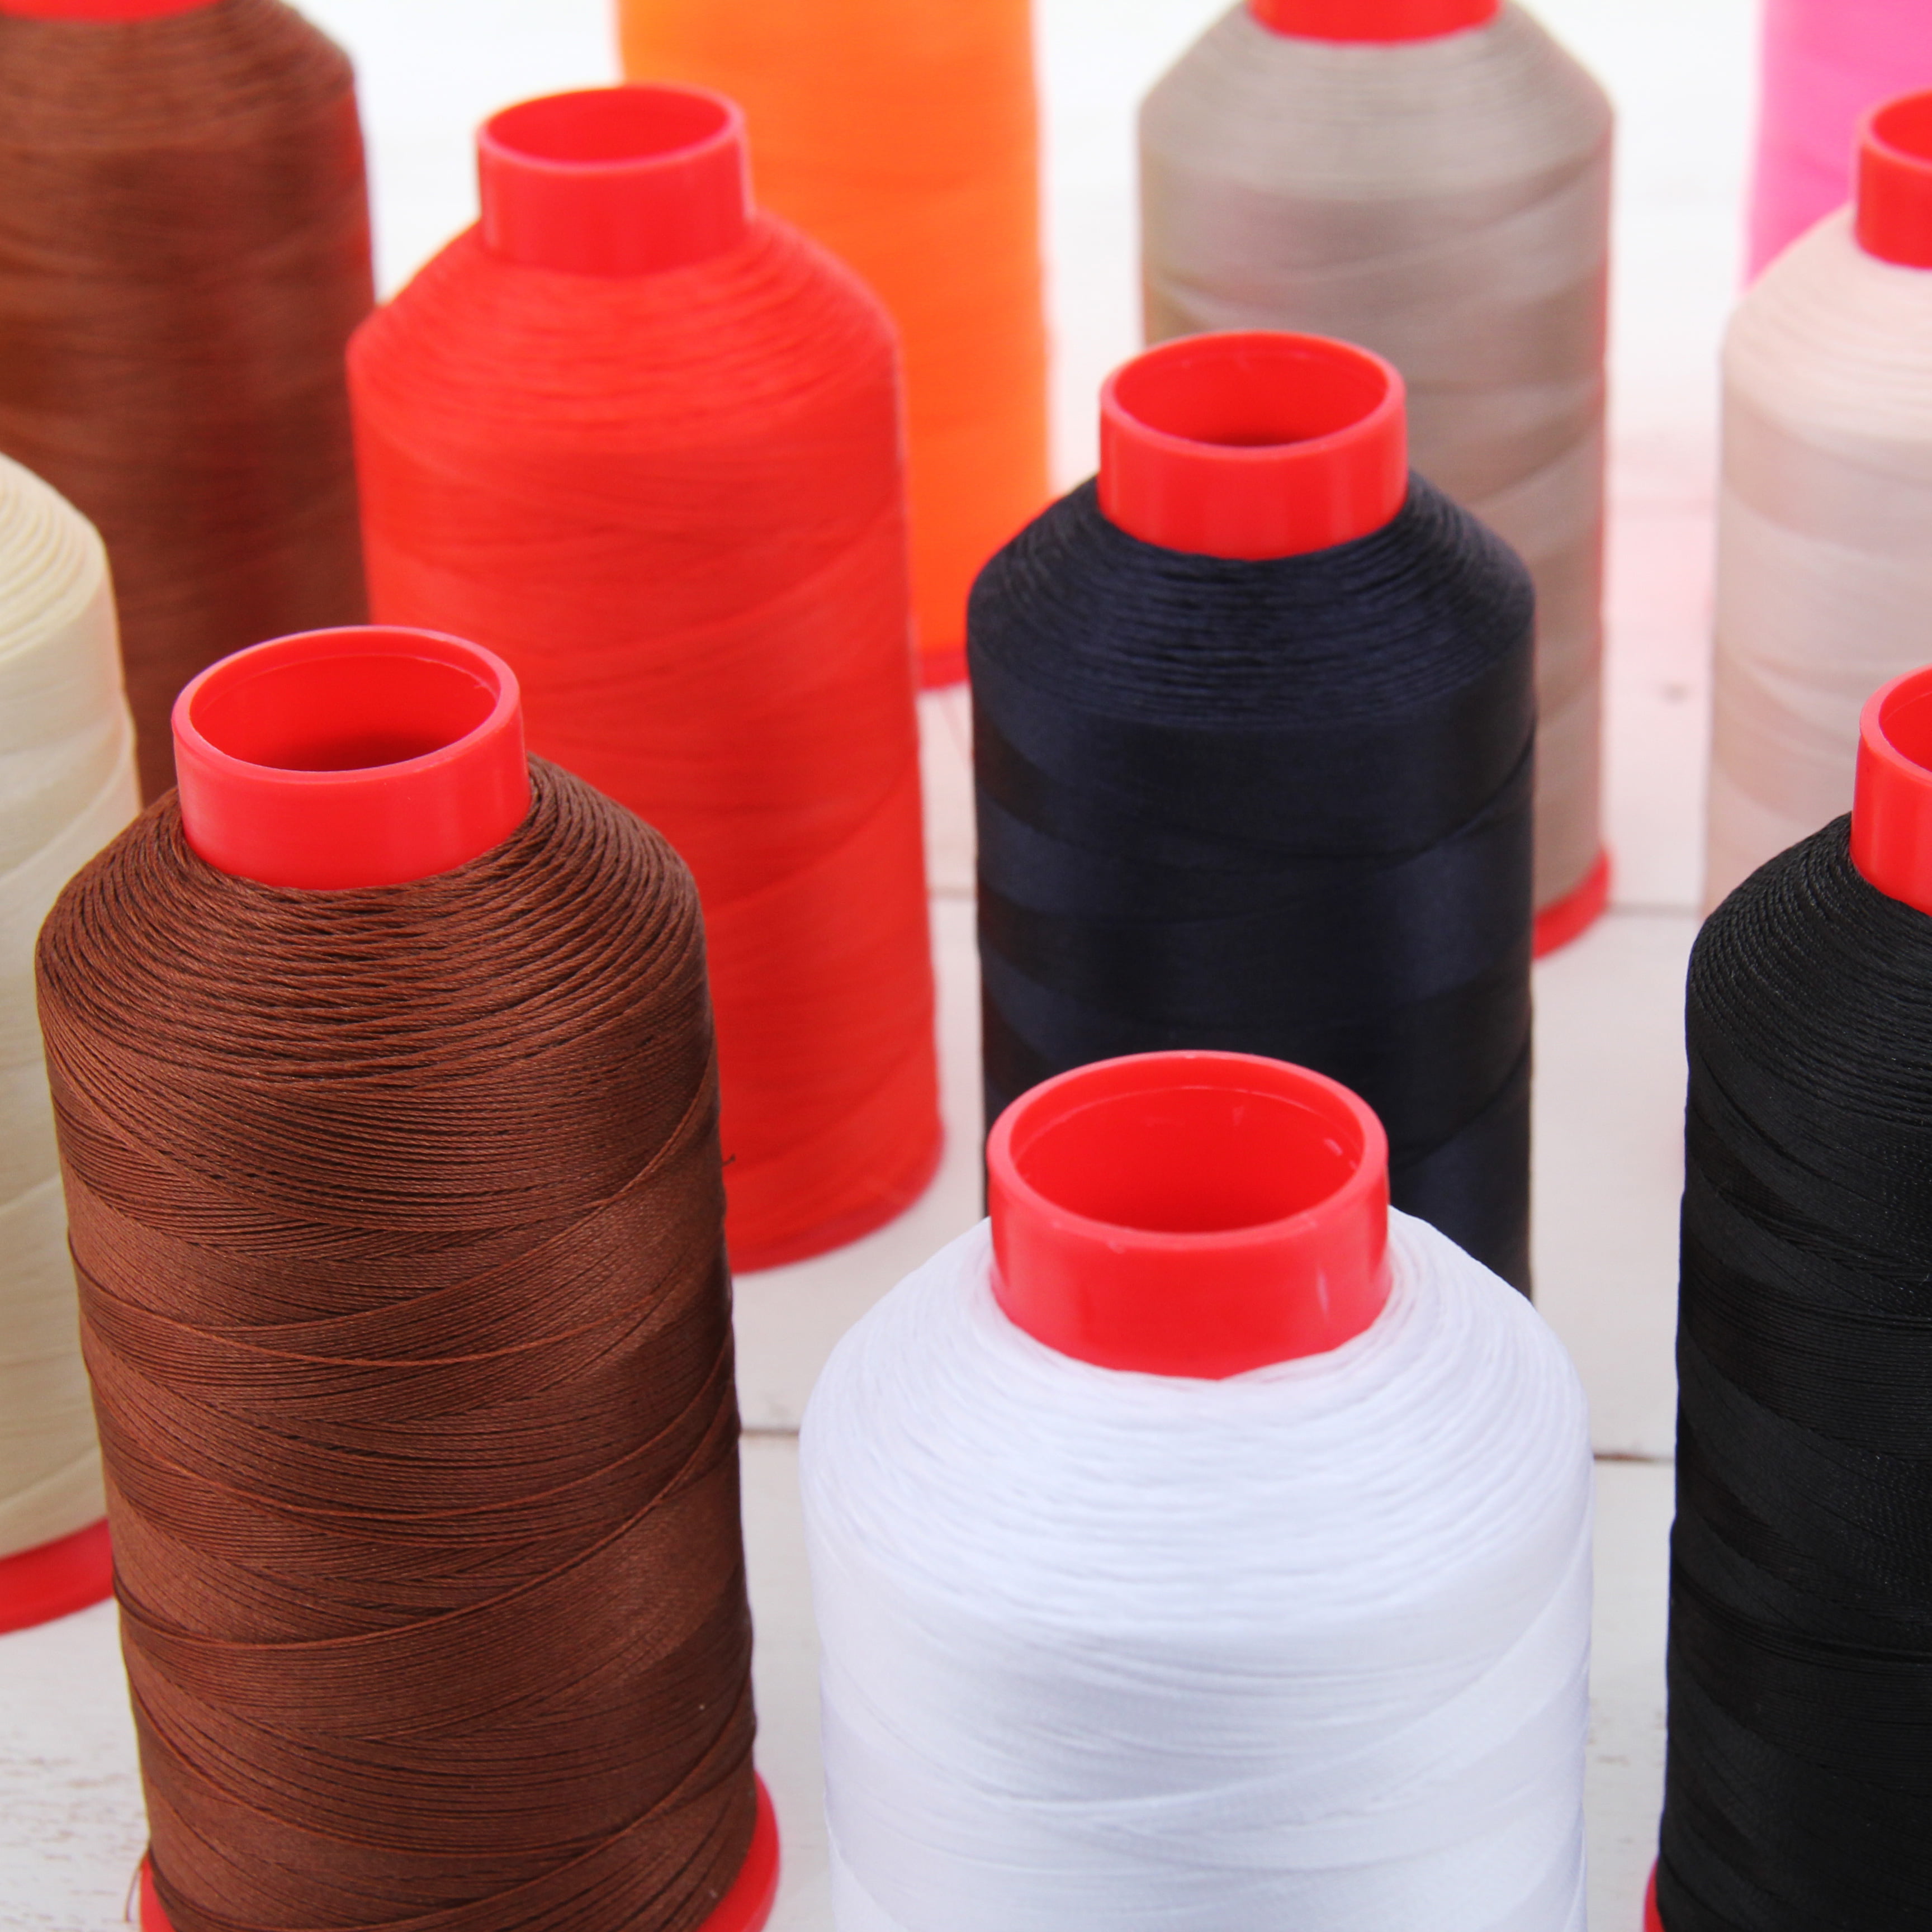 NEON Coral Nylon Thread NEON Colors Bonded #69 Upholstery Canvas Leather 1650YD Cones TEX70-6 Colors